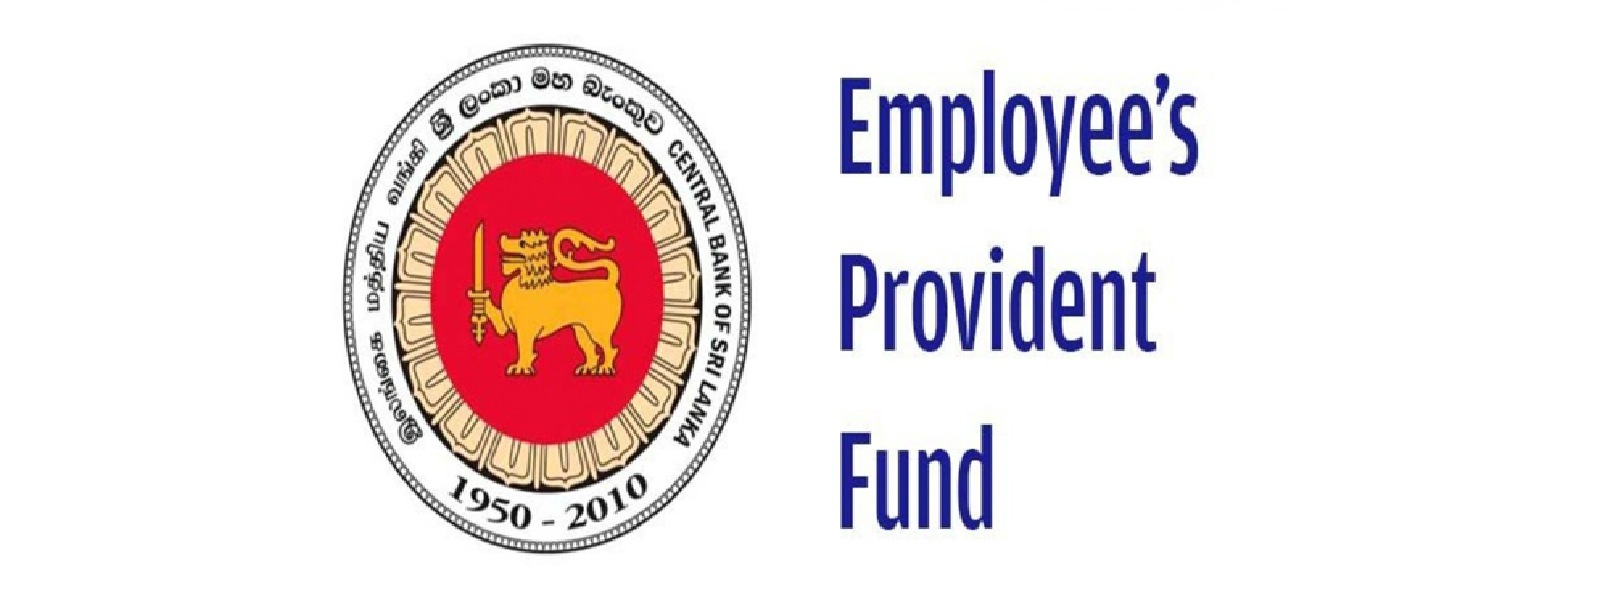 Grace period to pay EPF contributions further extended